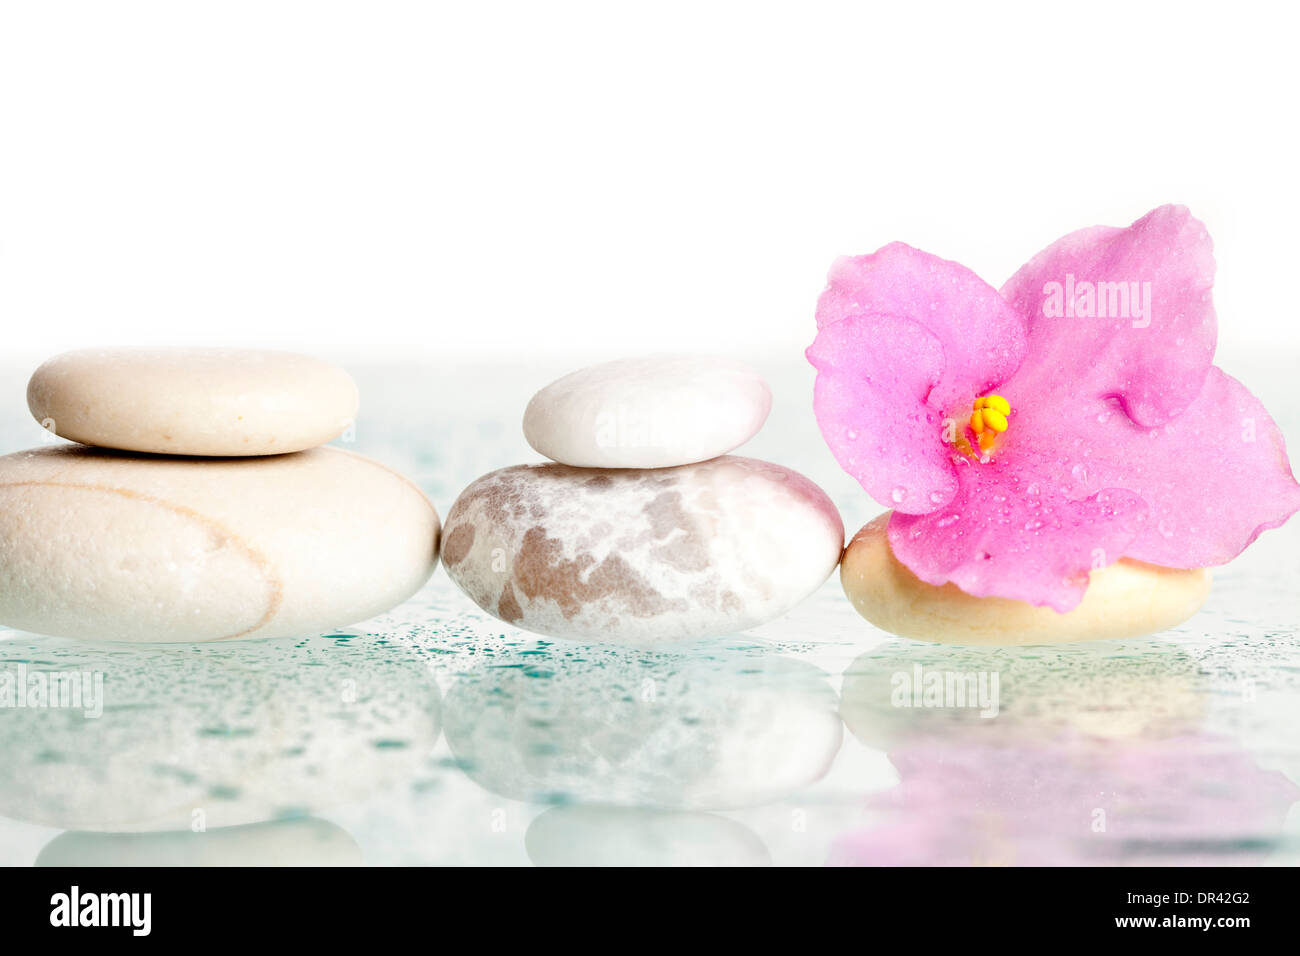 Spa stones and pink flower on white background Stock Photo